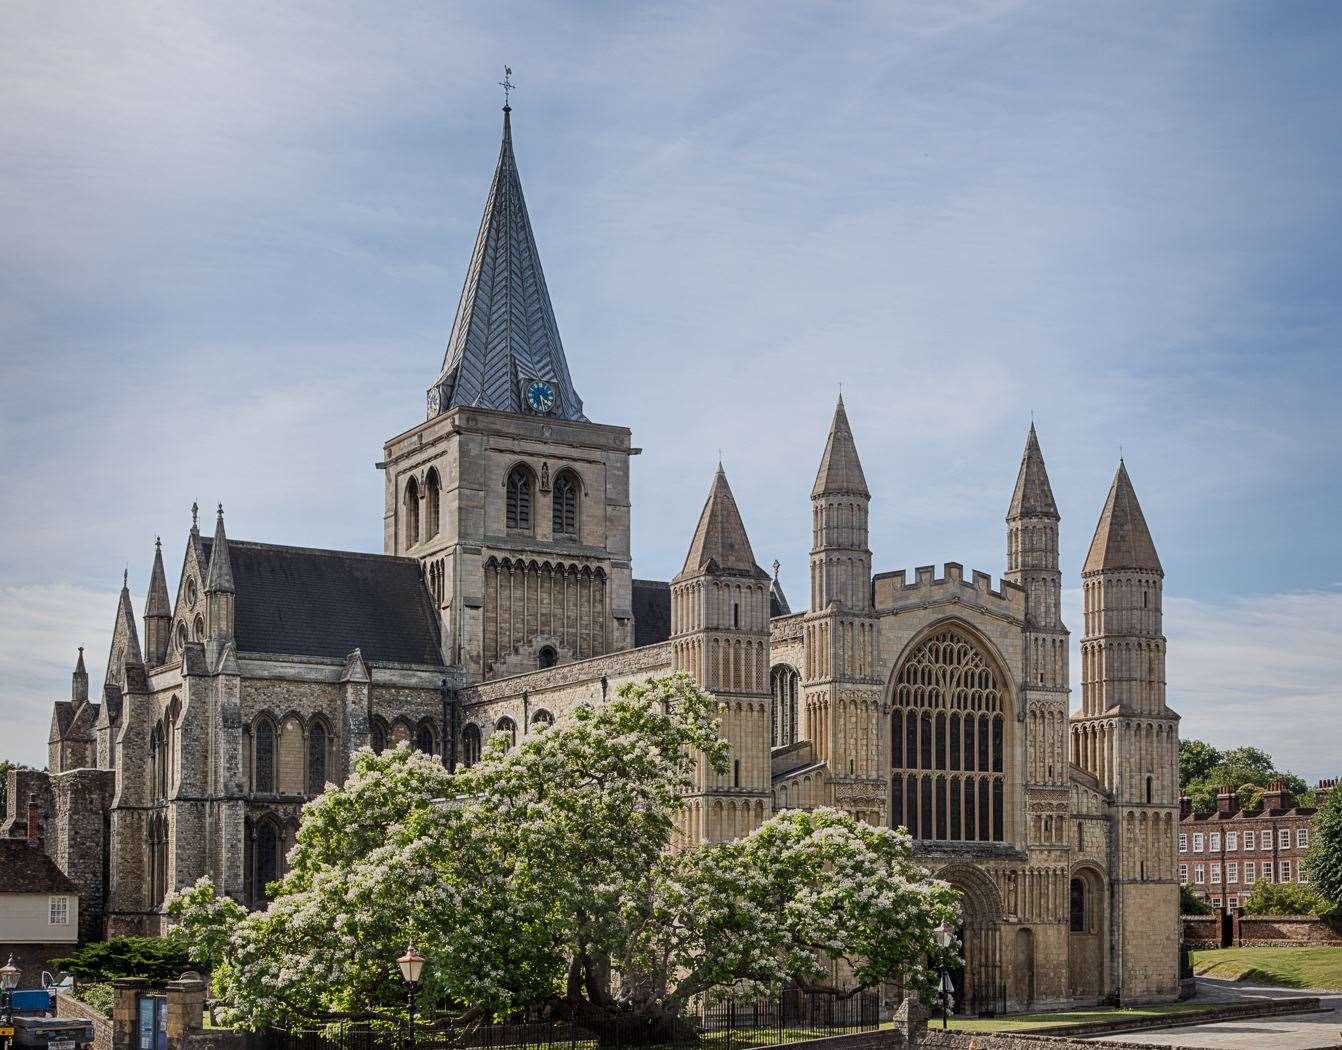 Rochester Cathedral is understood to be looking at setting up 'warm banks' at some of its churches